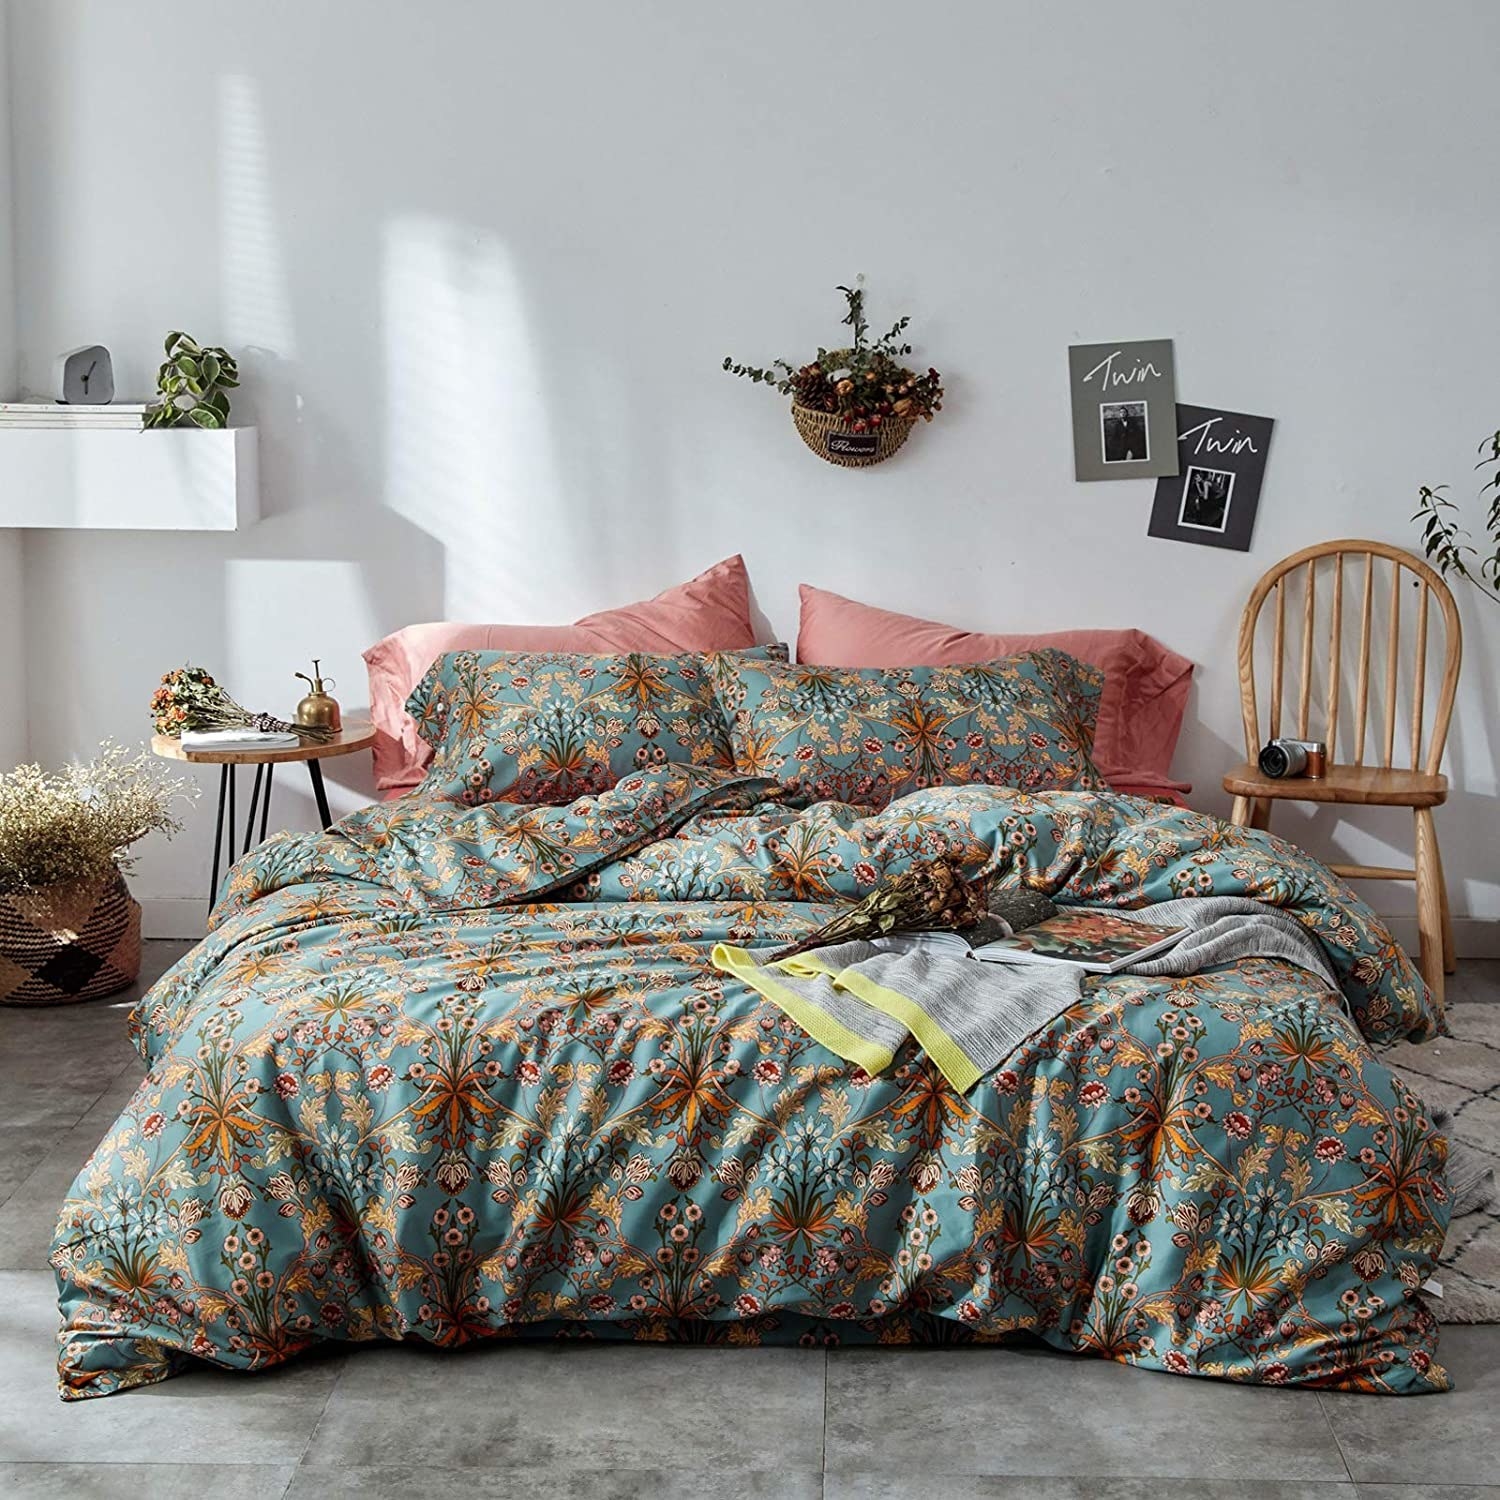 Pattern 3902 of the vintage style duvet cover set on a king sized bed in a minimalist style bedroom 